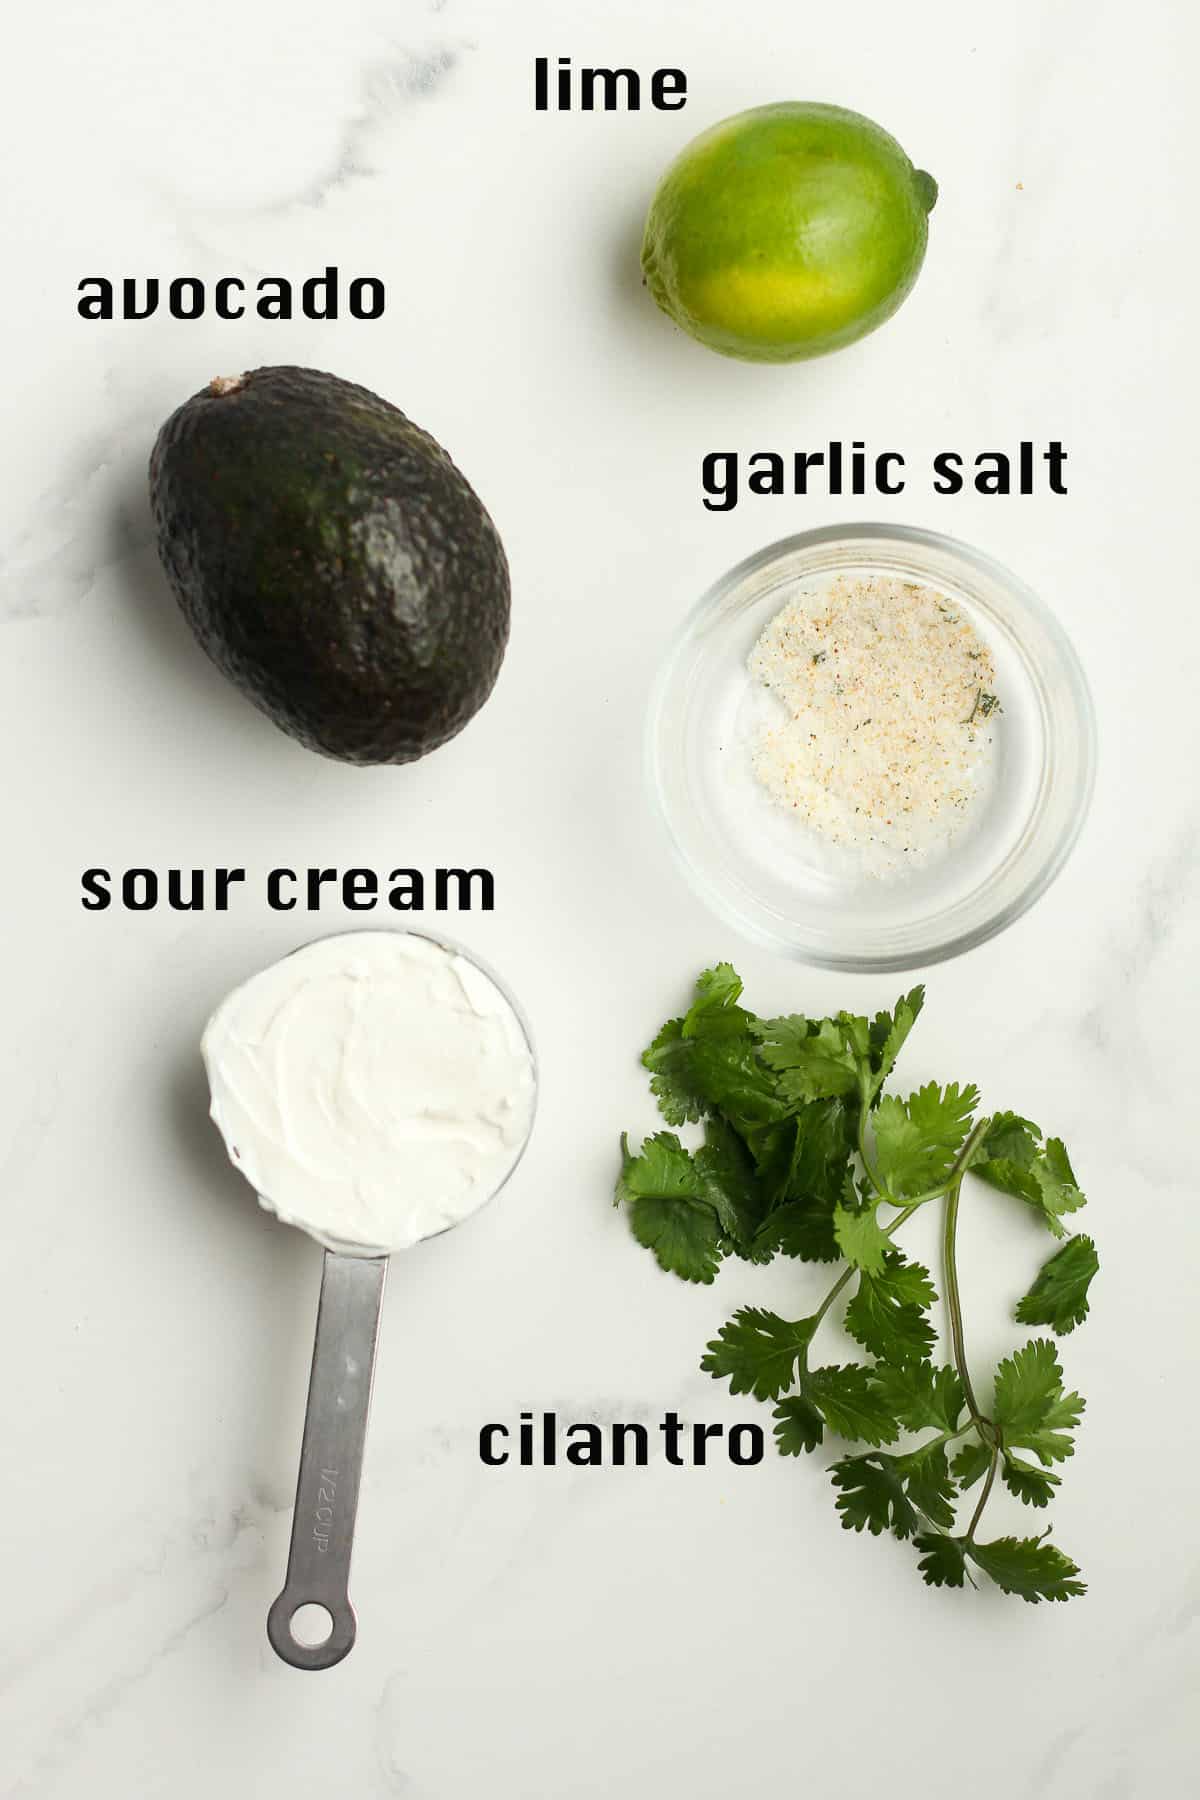 The ingredients for avocado Crema.